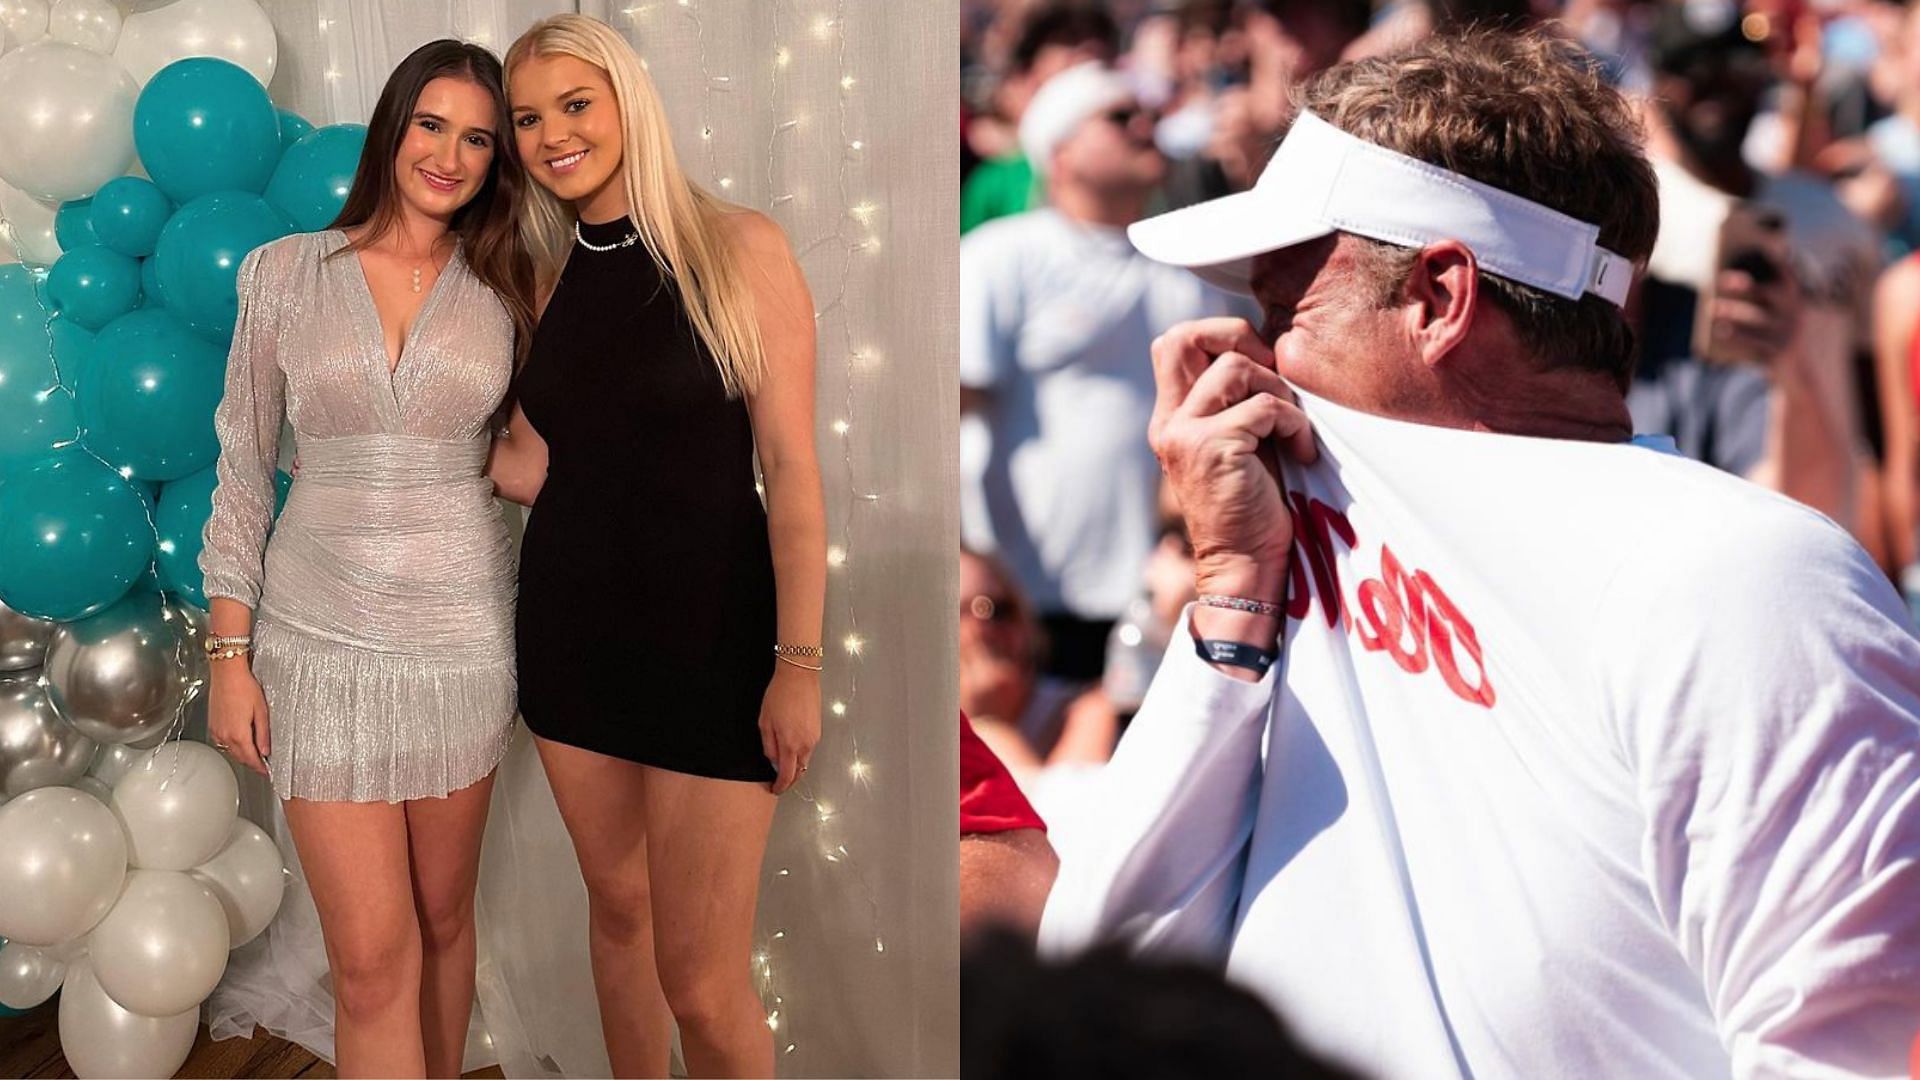 Lane Kiffin wrote a message for Landy and her BFF.